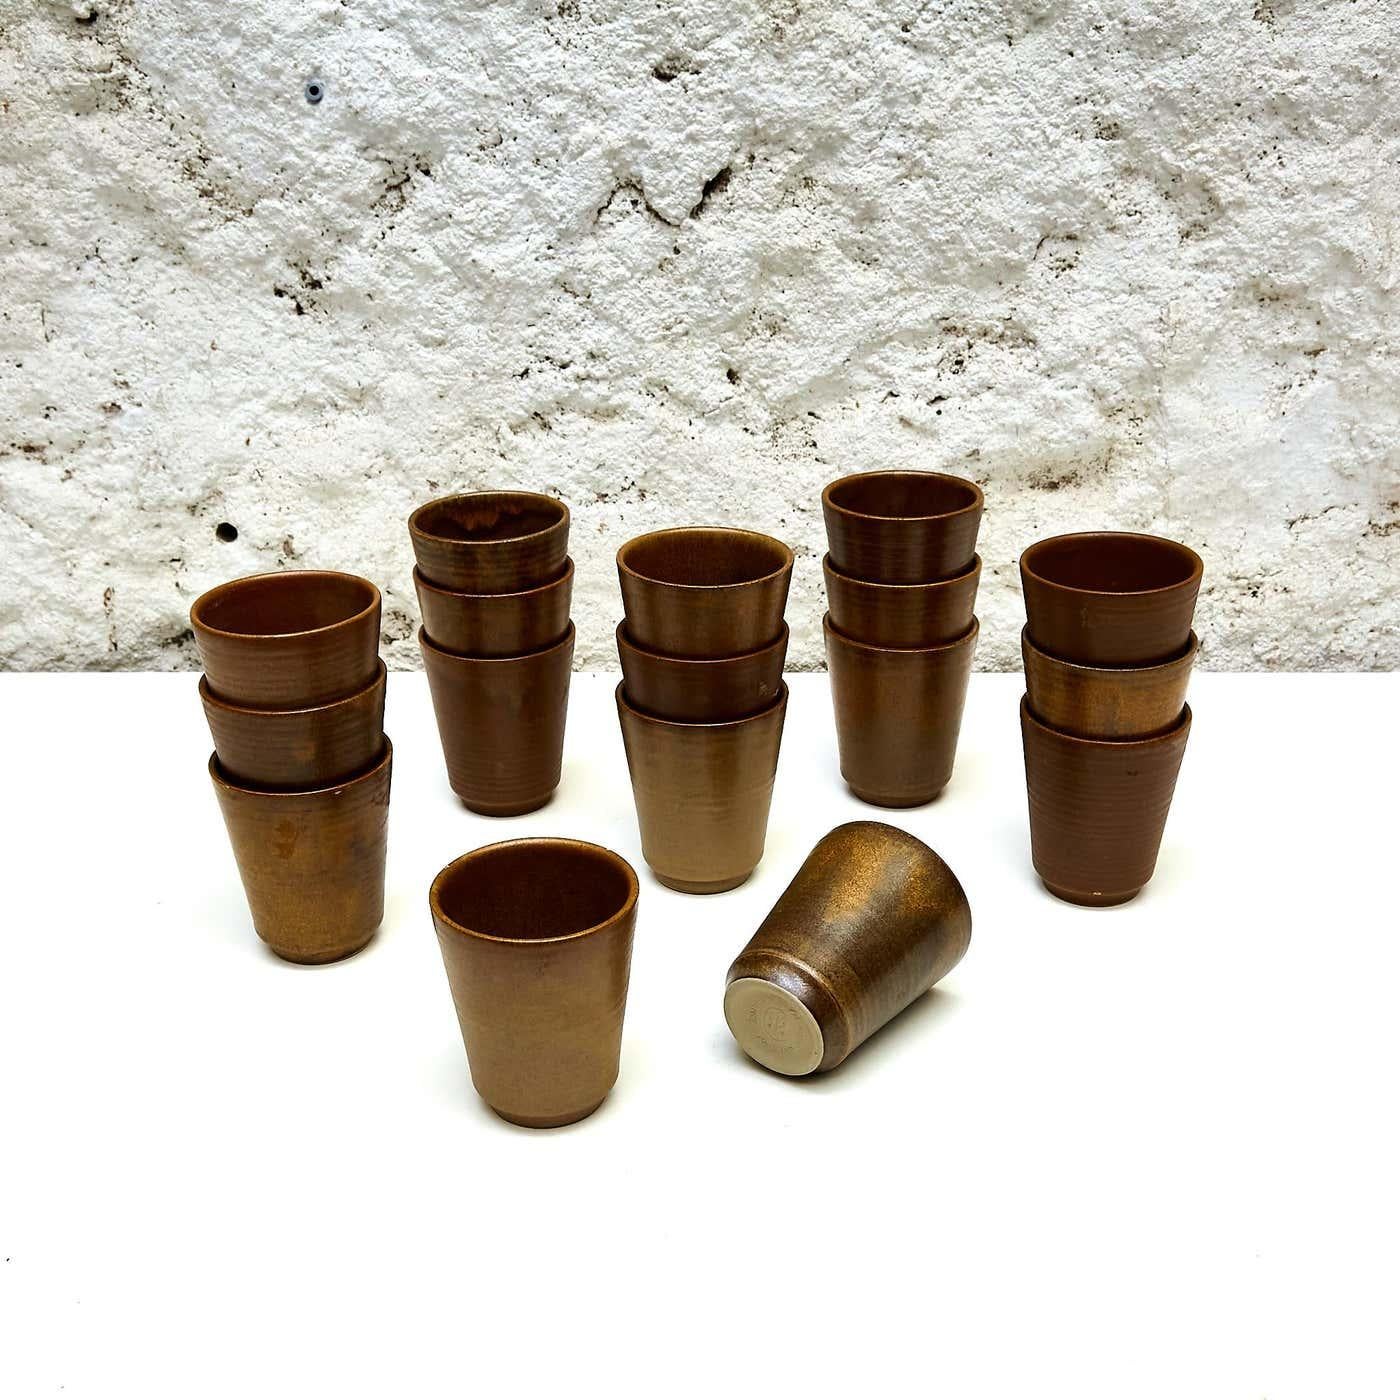 Set of 17 Ceramic Glass by Grespots.

Manufactured in France, circa 1960.

In original condition with minor wear consistent of age and use, preserving a beautiful patina.

Materials: 
Ceramic.

Important information regarding color(s) of